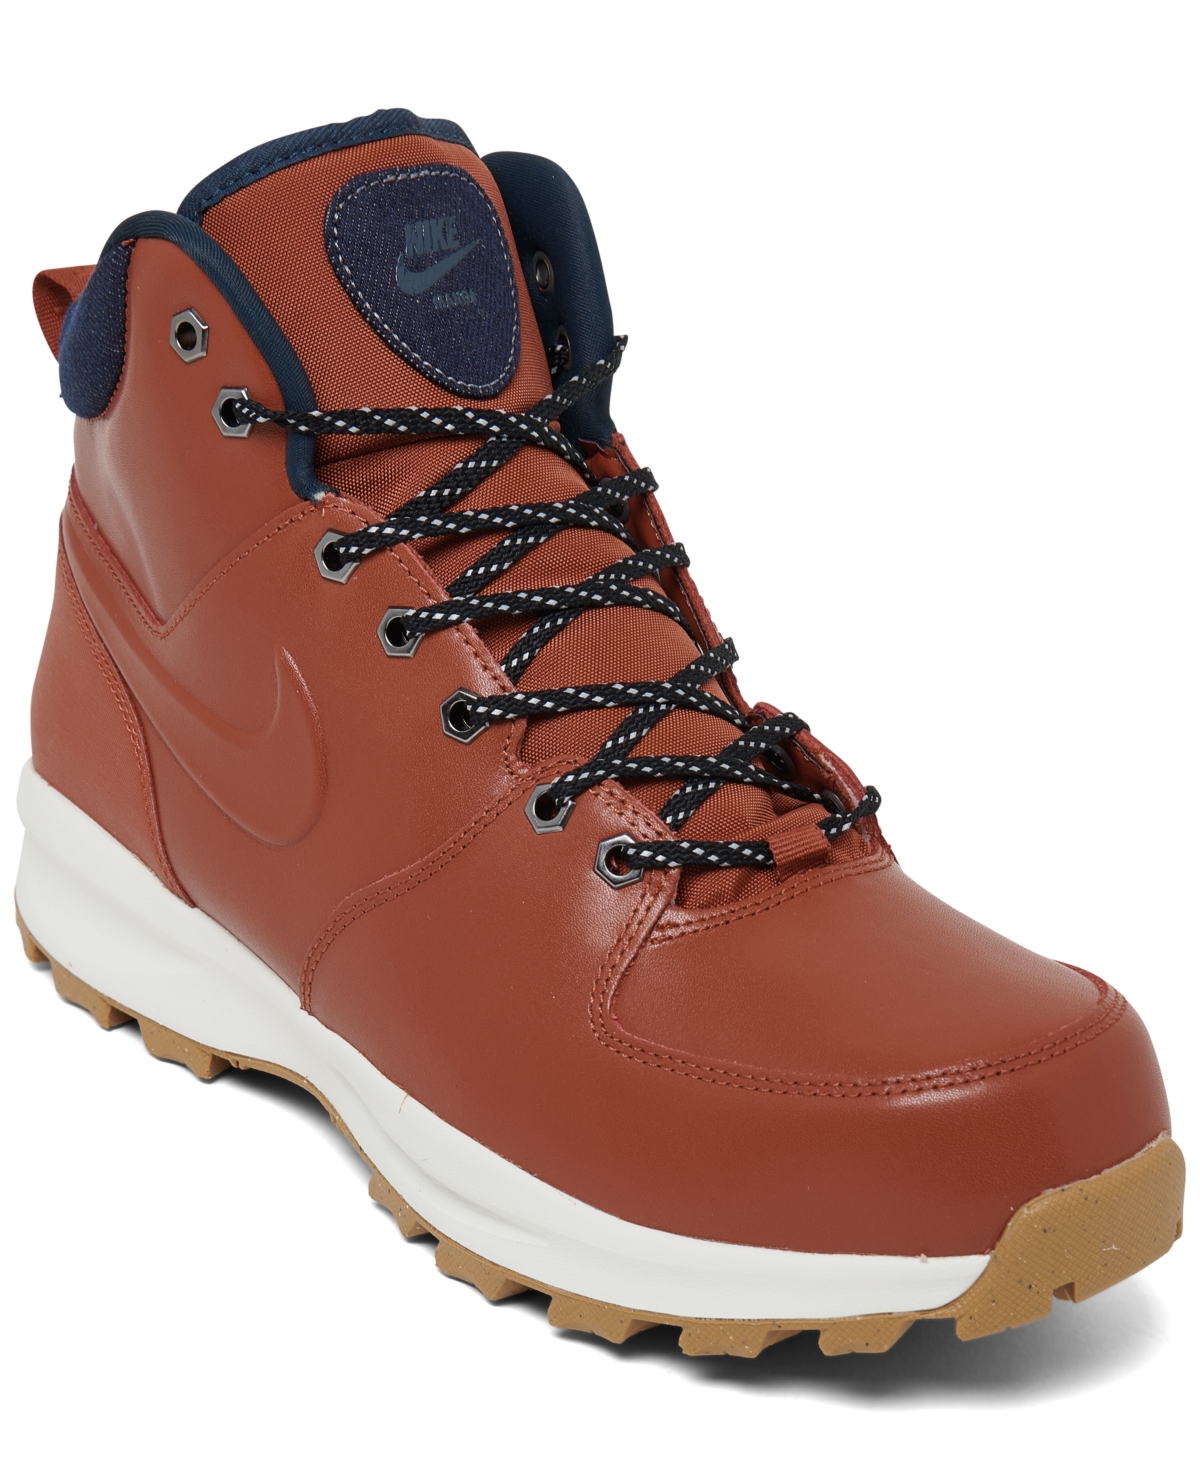 Nike Men's Manoa Leather Se Boots From Finish Line In Rugged Orange,armory